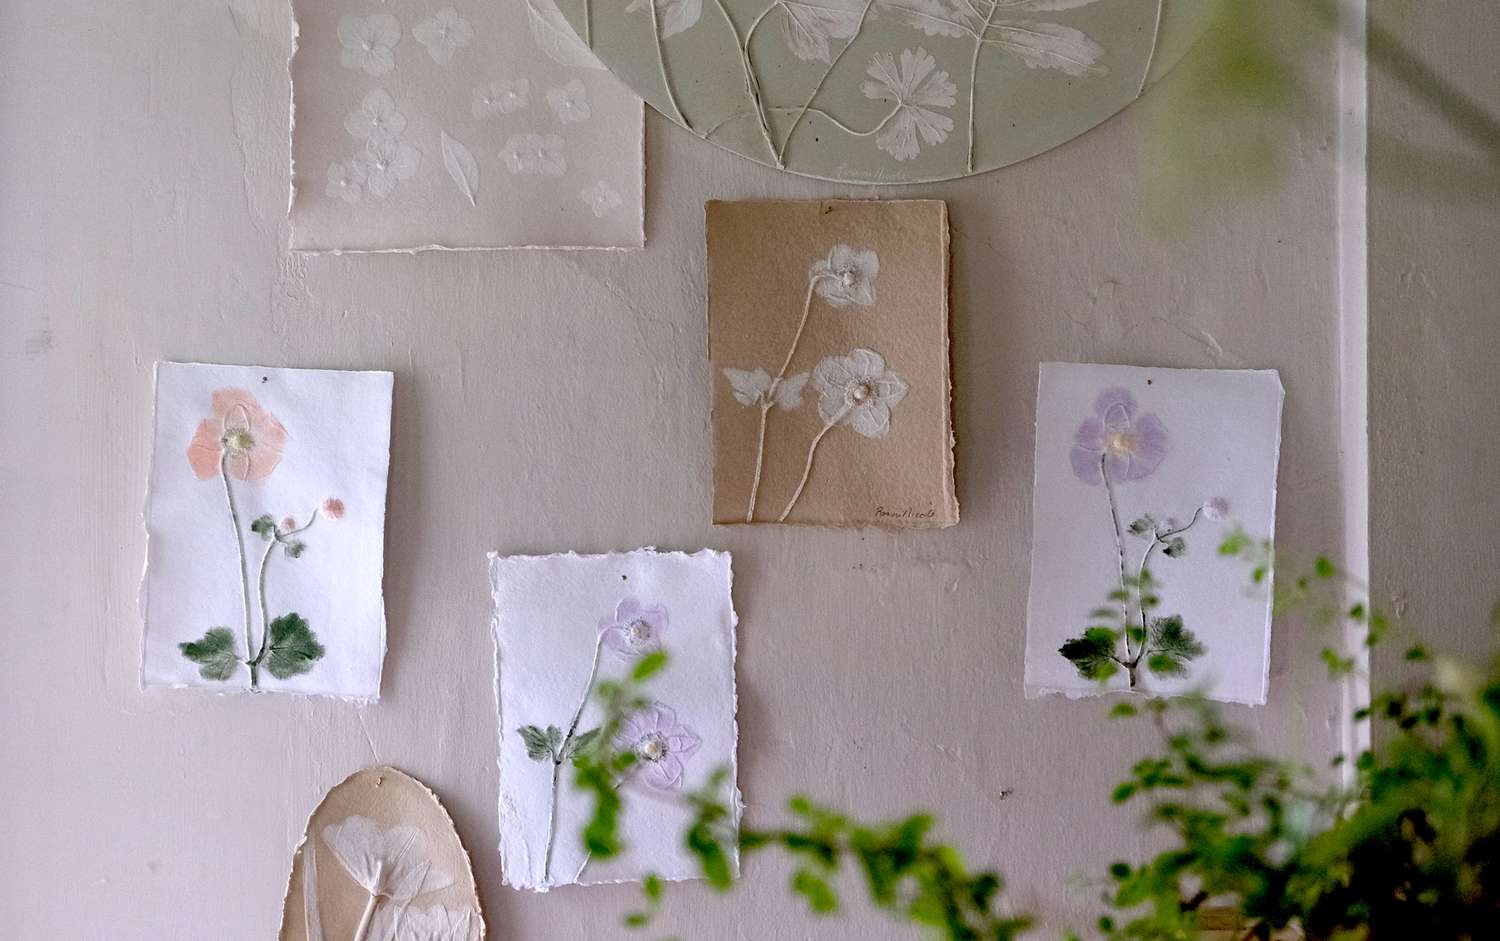 Floral paper artwork hung on the wall